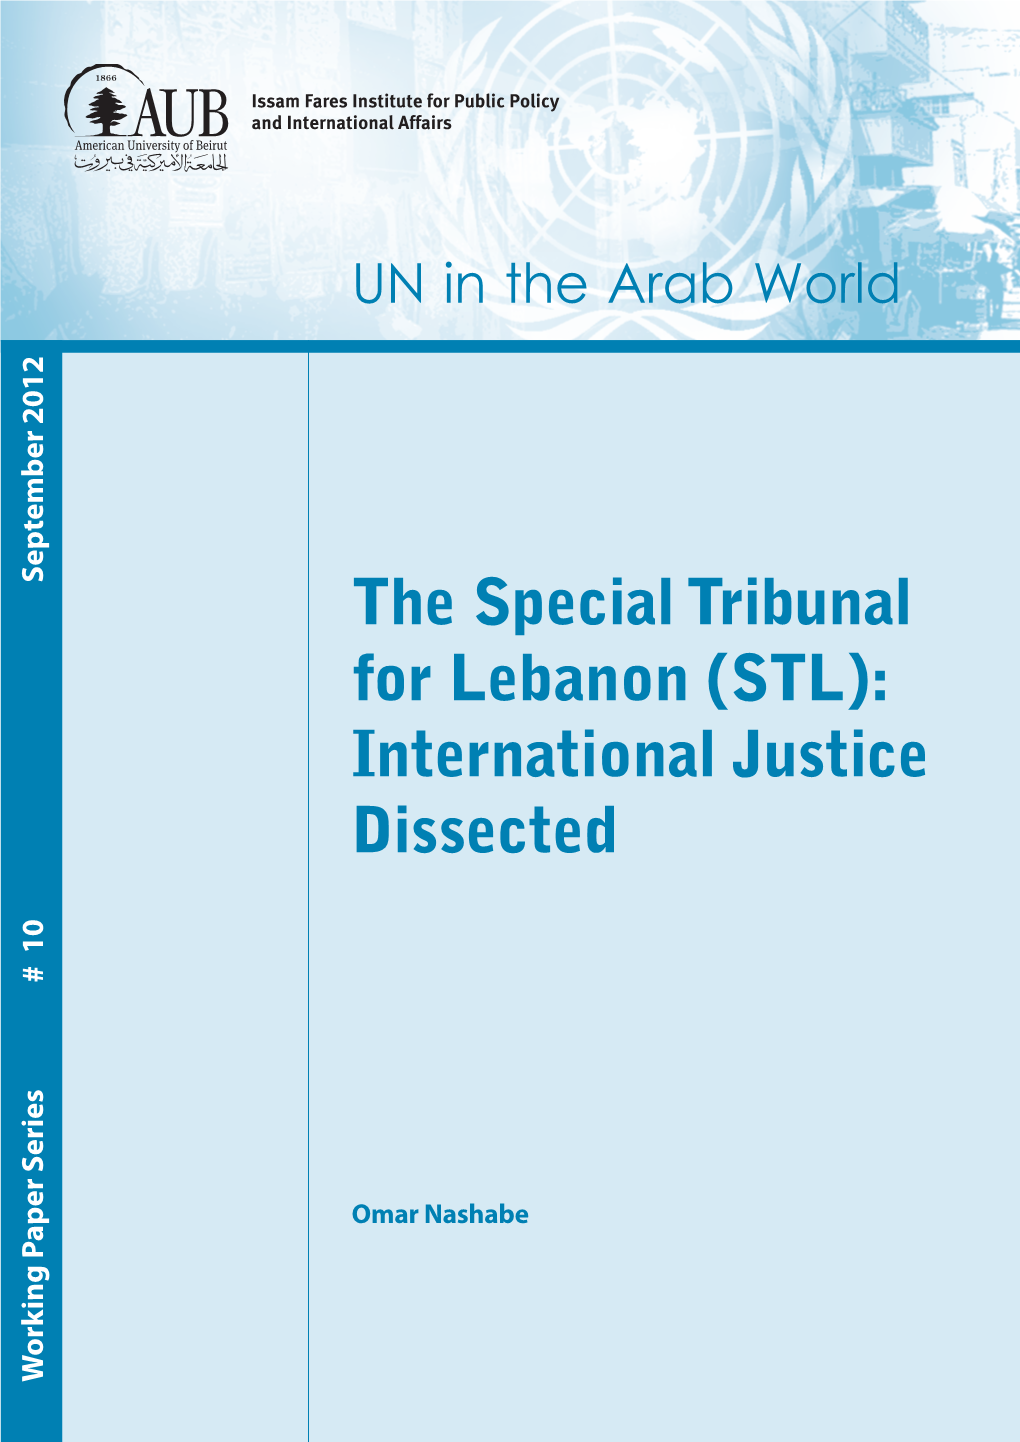 The Special Tribunal for Lebanon (STL): International Justice Dissected